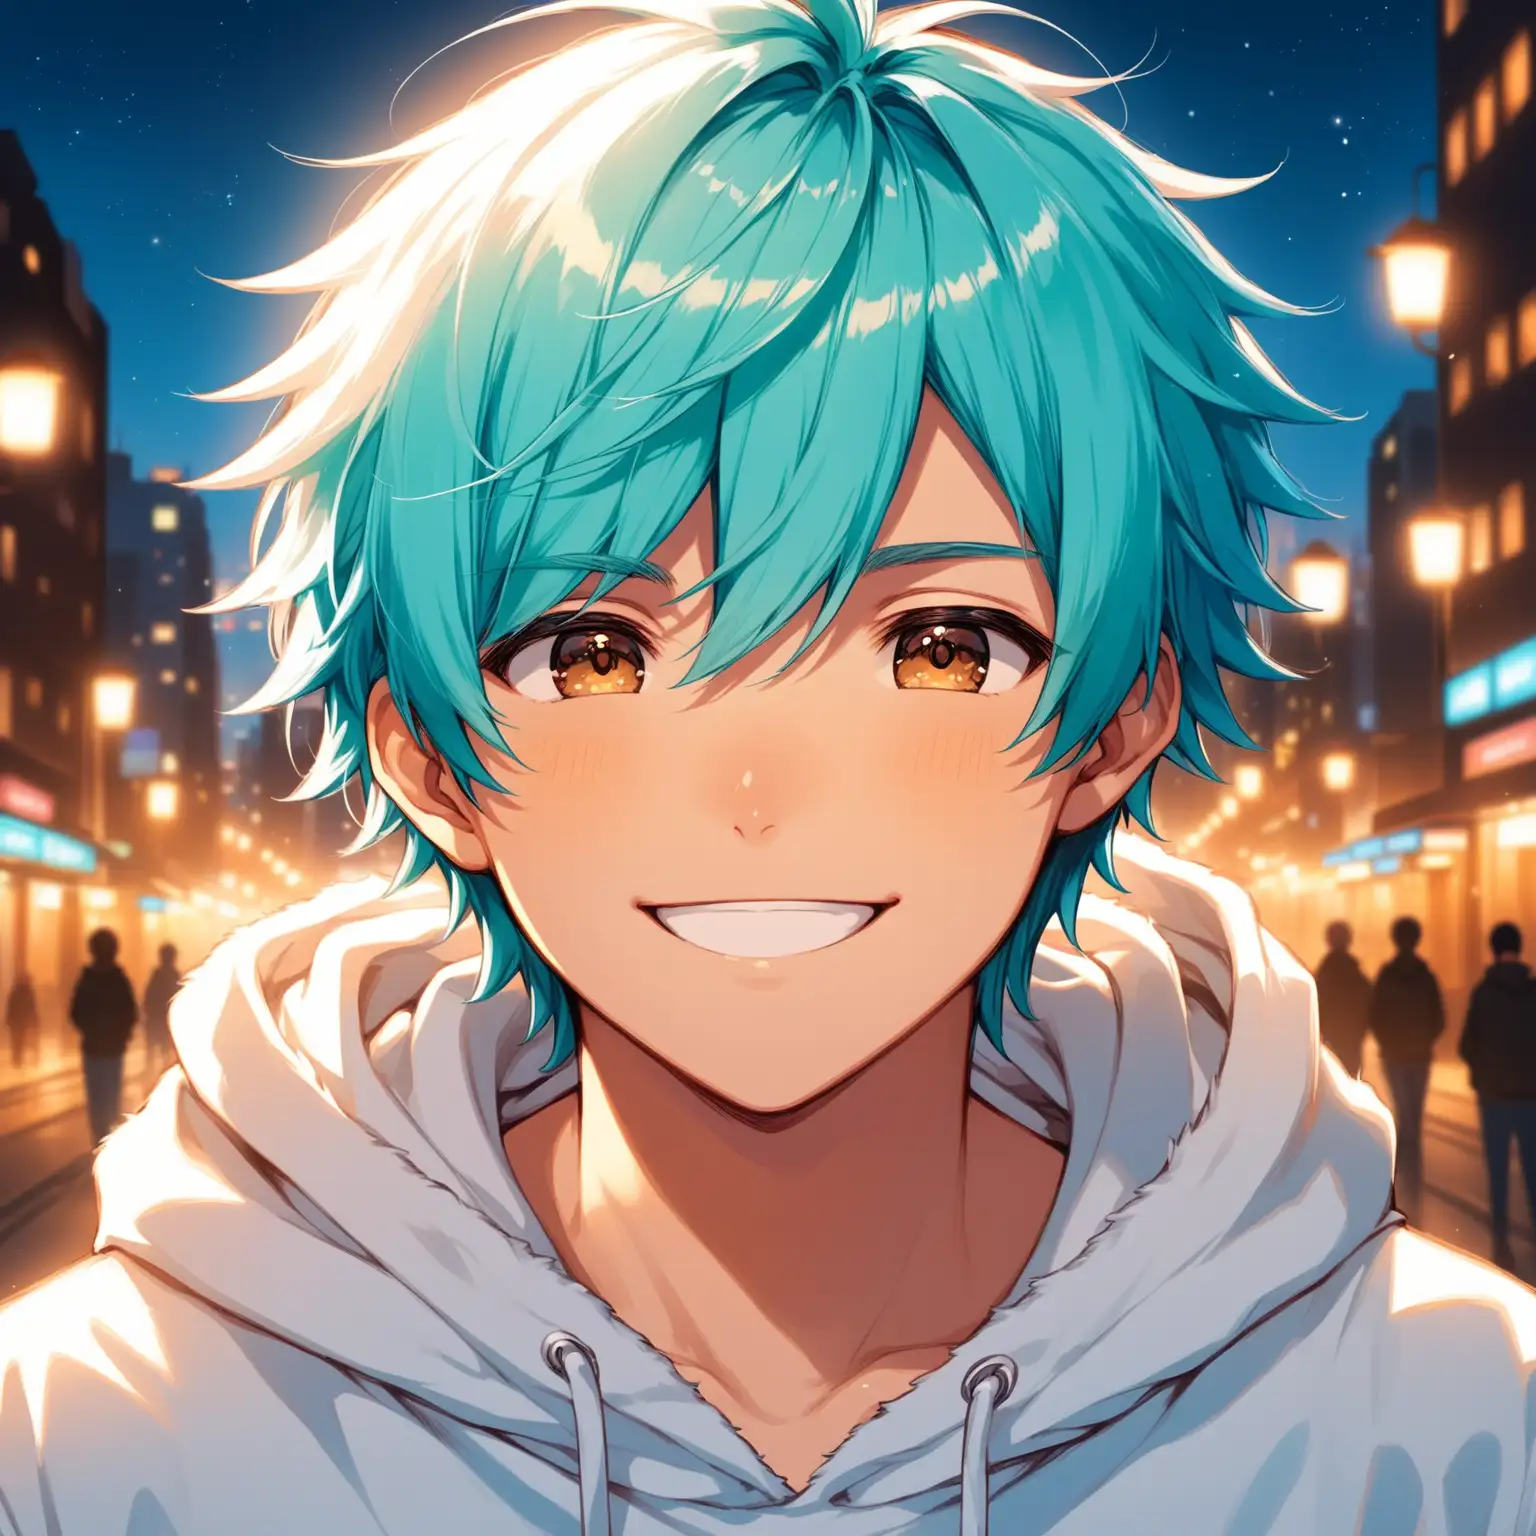 Draw a cute anime boy, high quality, close up, ambient lighting, city, white hoodie, fluffy aquamarine hair, brown eyes, smiling